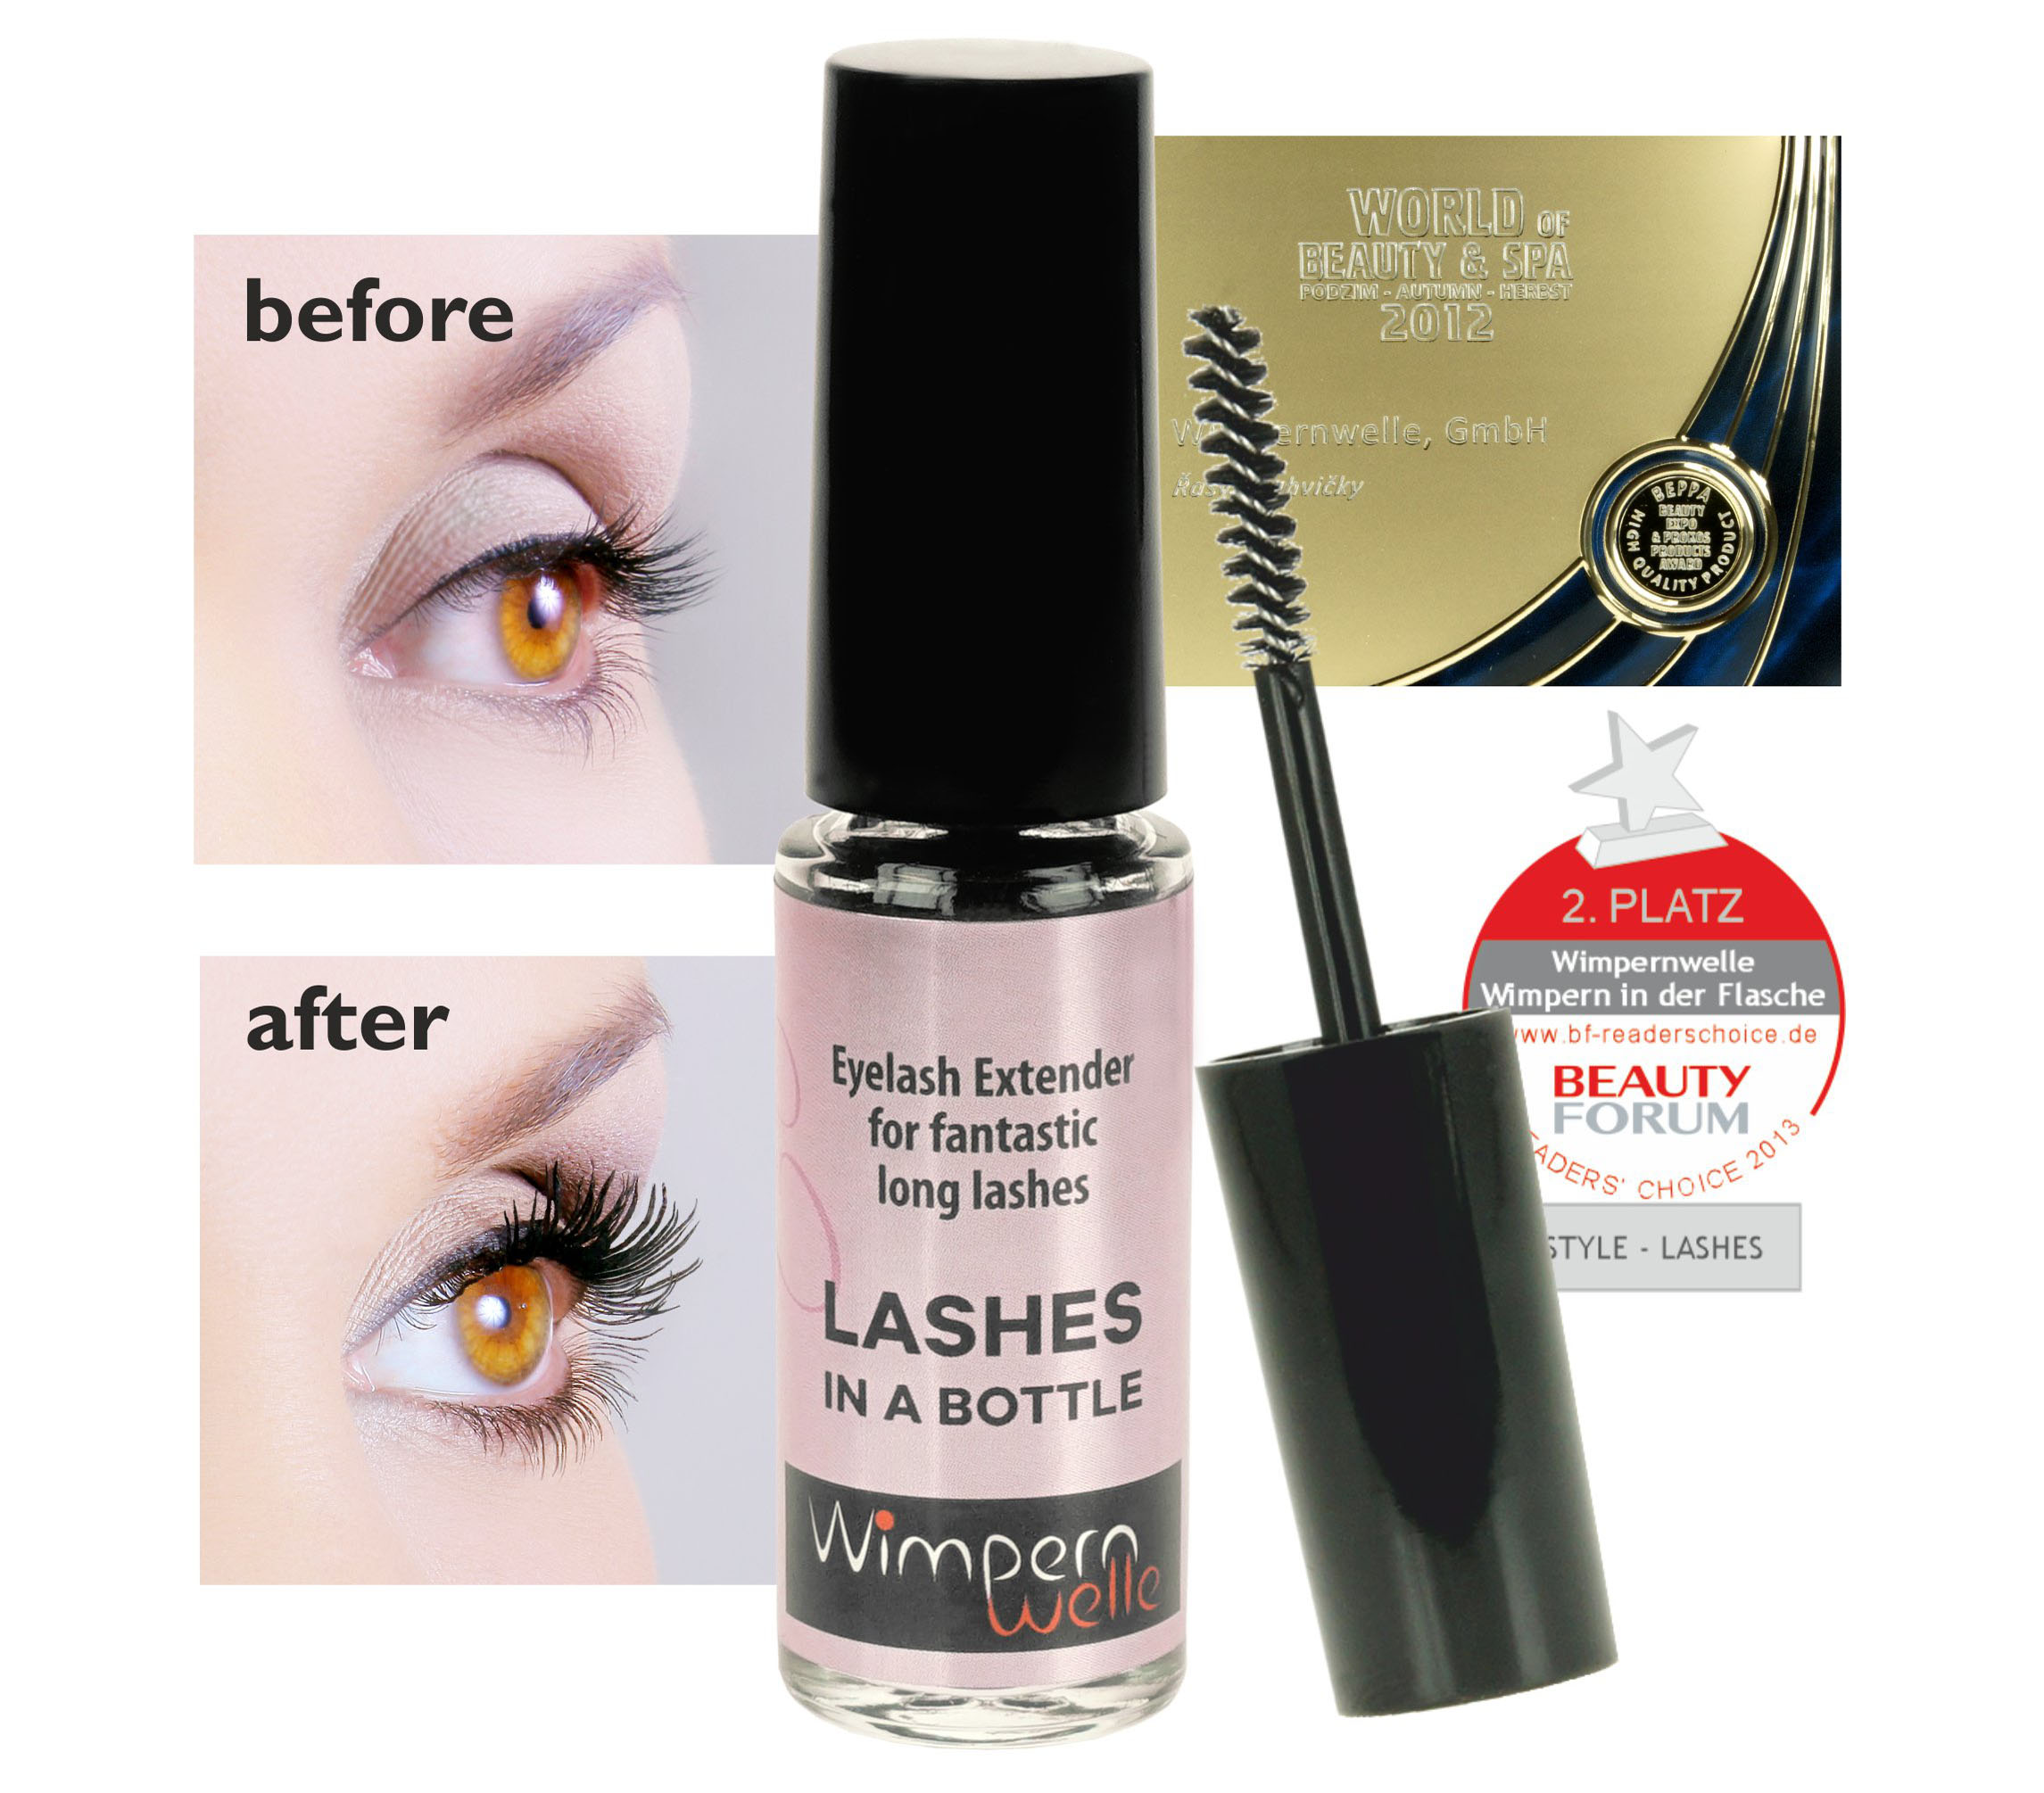 Product category: Lashes in a bottle